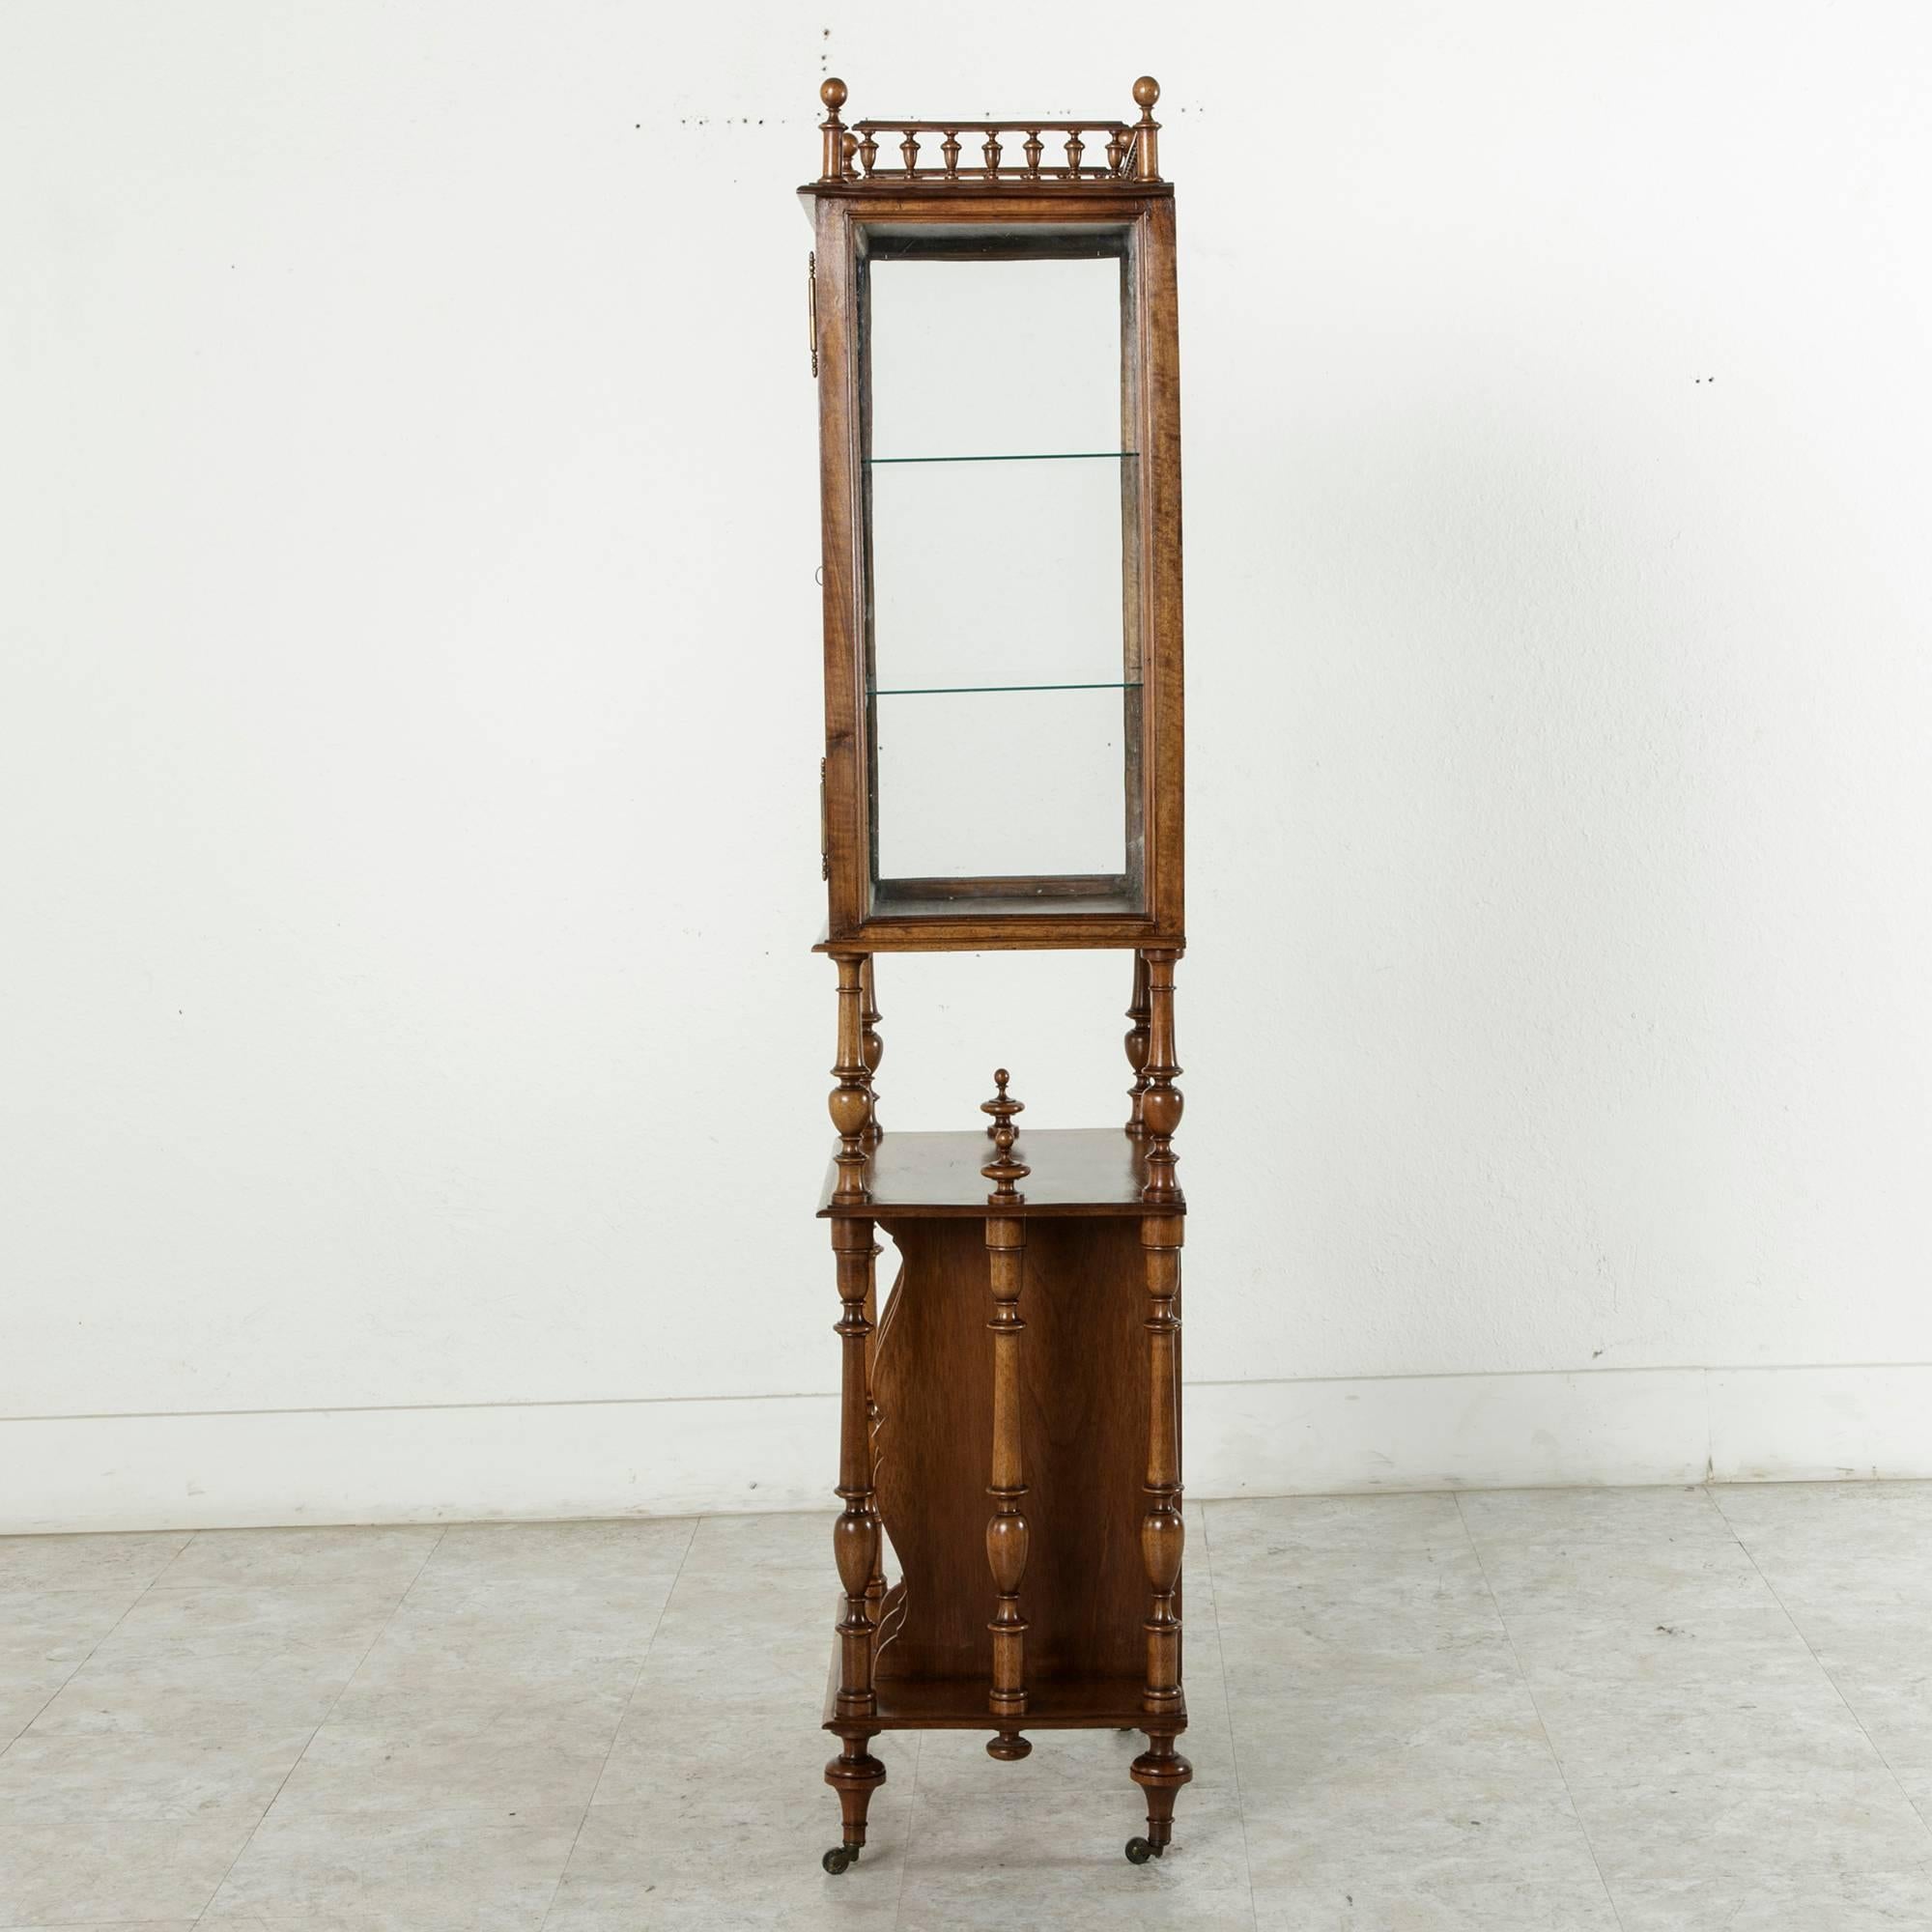 This late 19th century French walnut vitrine was originally used as a music cabinet. Its upper cabinet has a mirror at the back, glass on three sides, and two glass shelves, ideal for displaying a collection of objets d'arts that can be viewed on